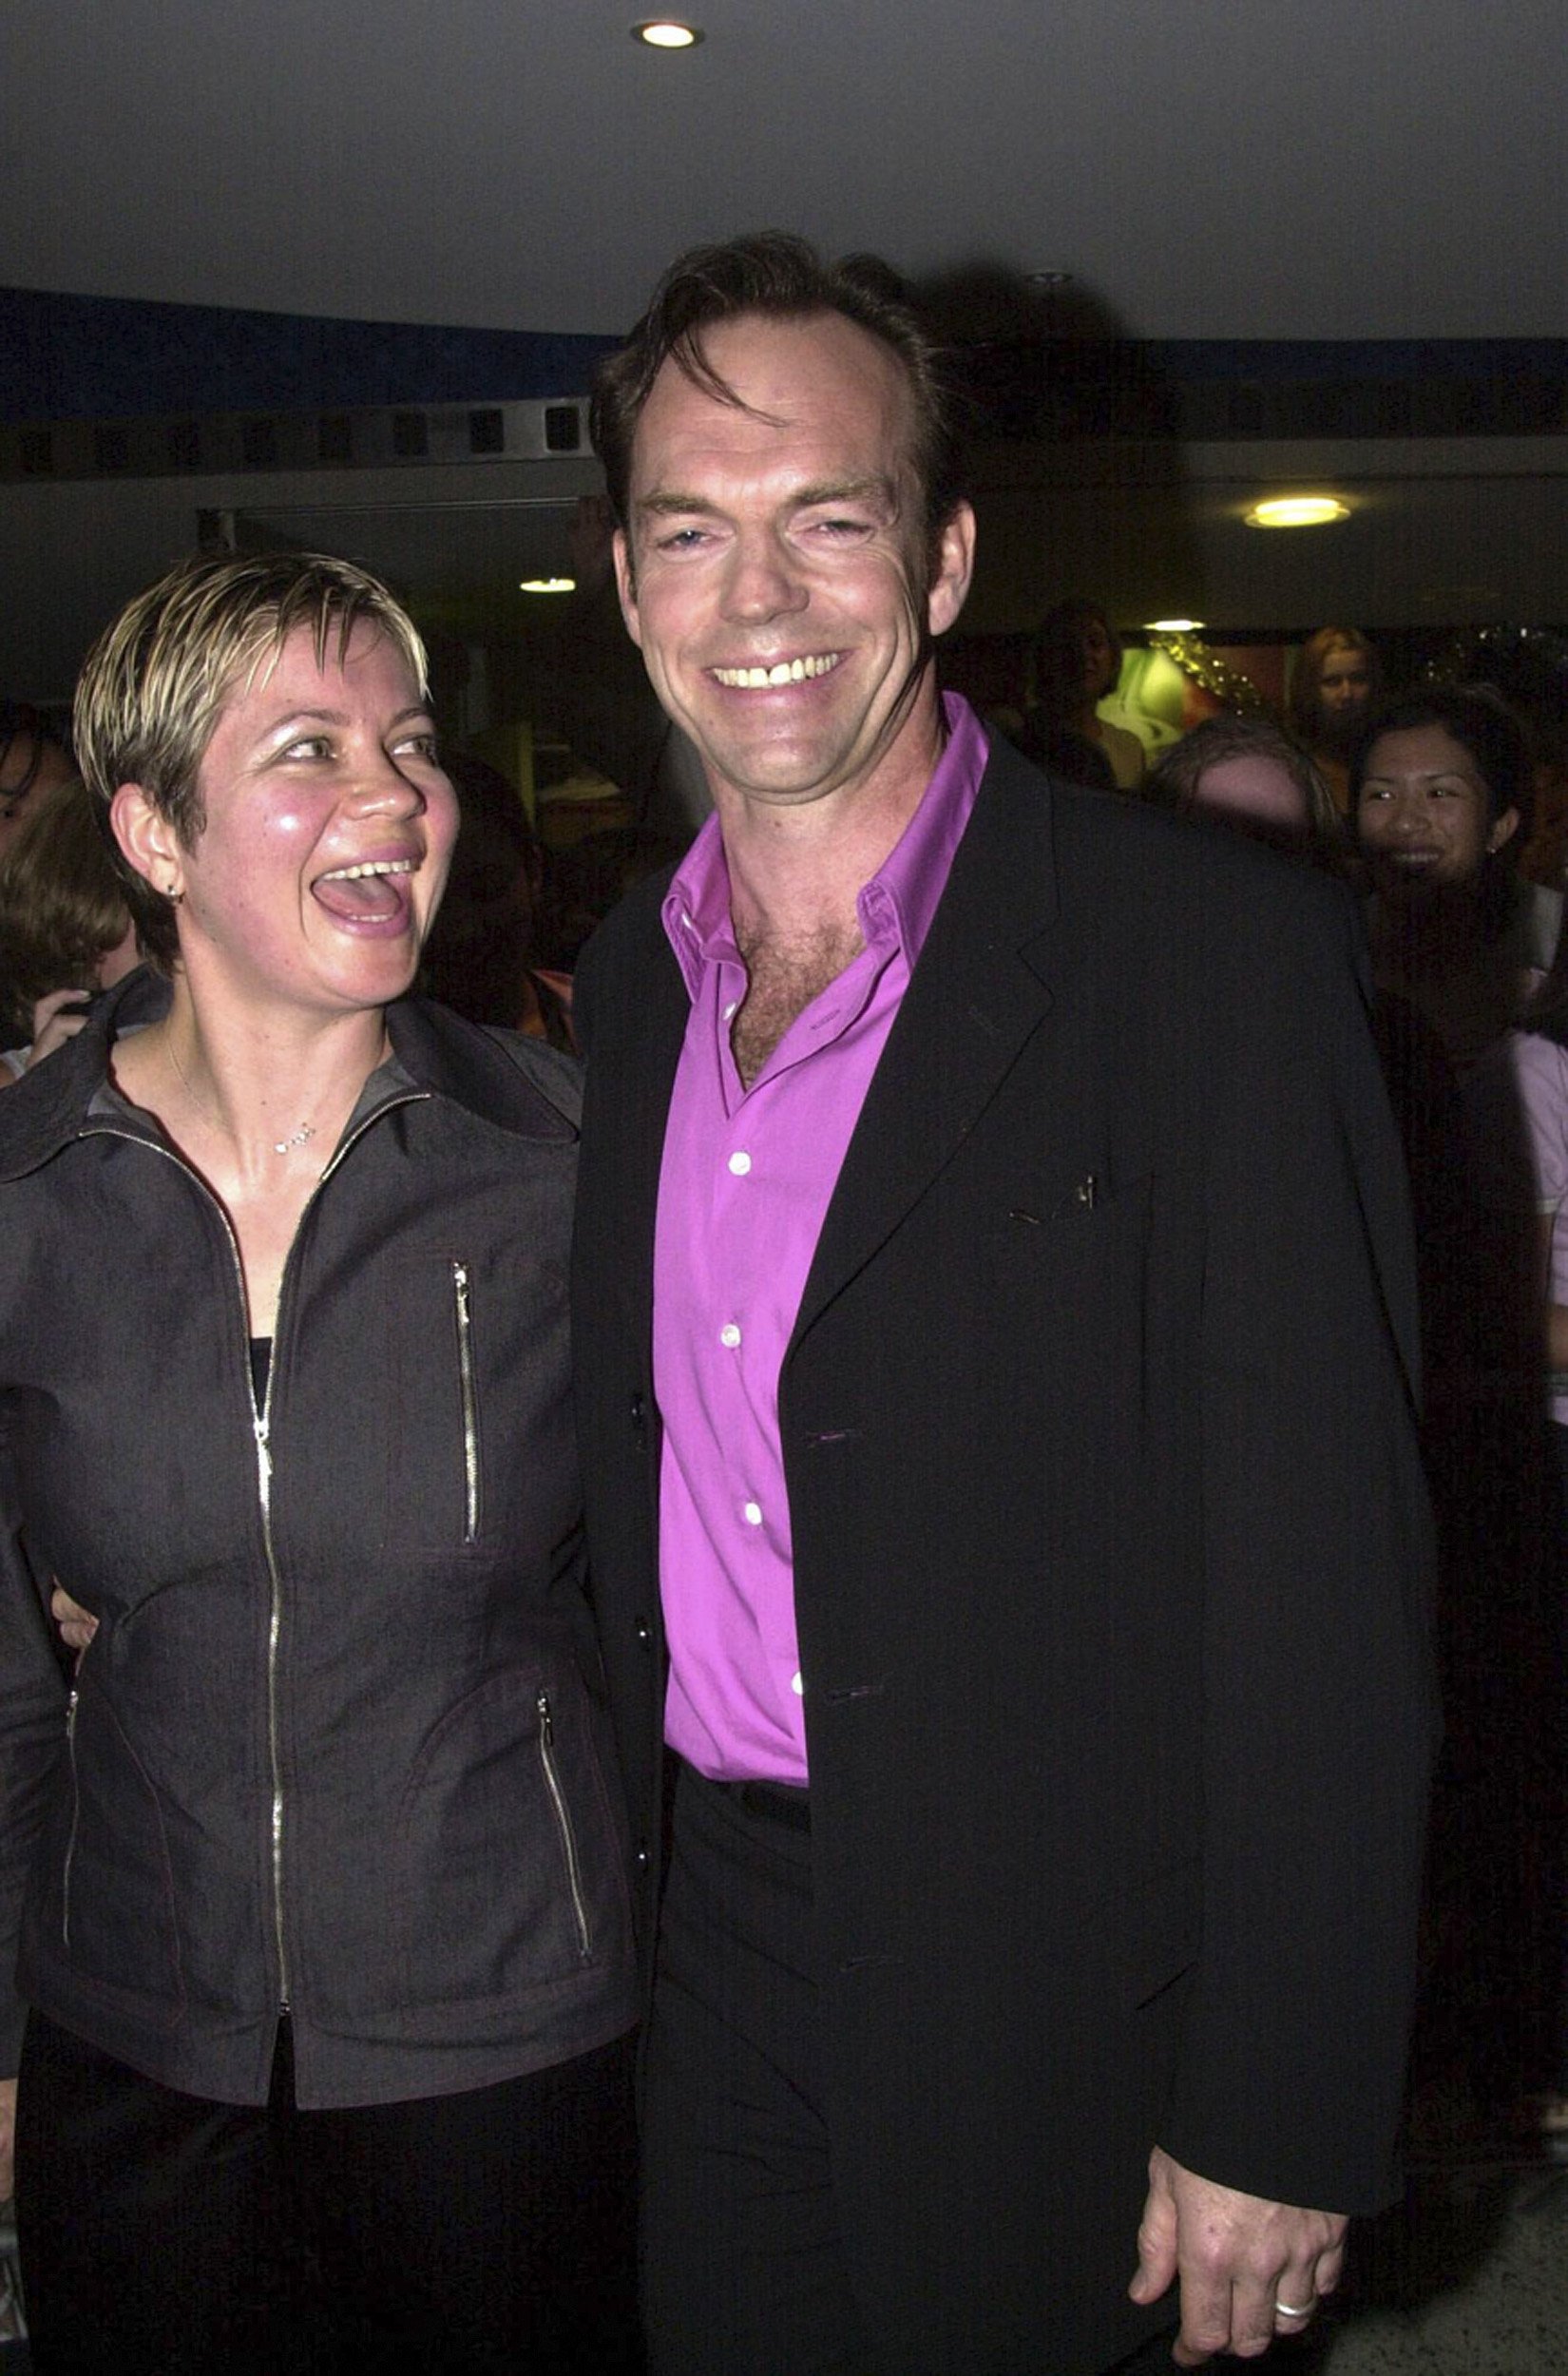 Hugo Weaving and Katrina Greenwood at "The Lord of the Rings" premiere hosted at The Hoyts Cinema in Sydney, Australia on December 21, 2001 | Source: Getty Images